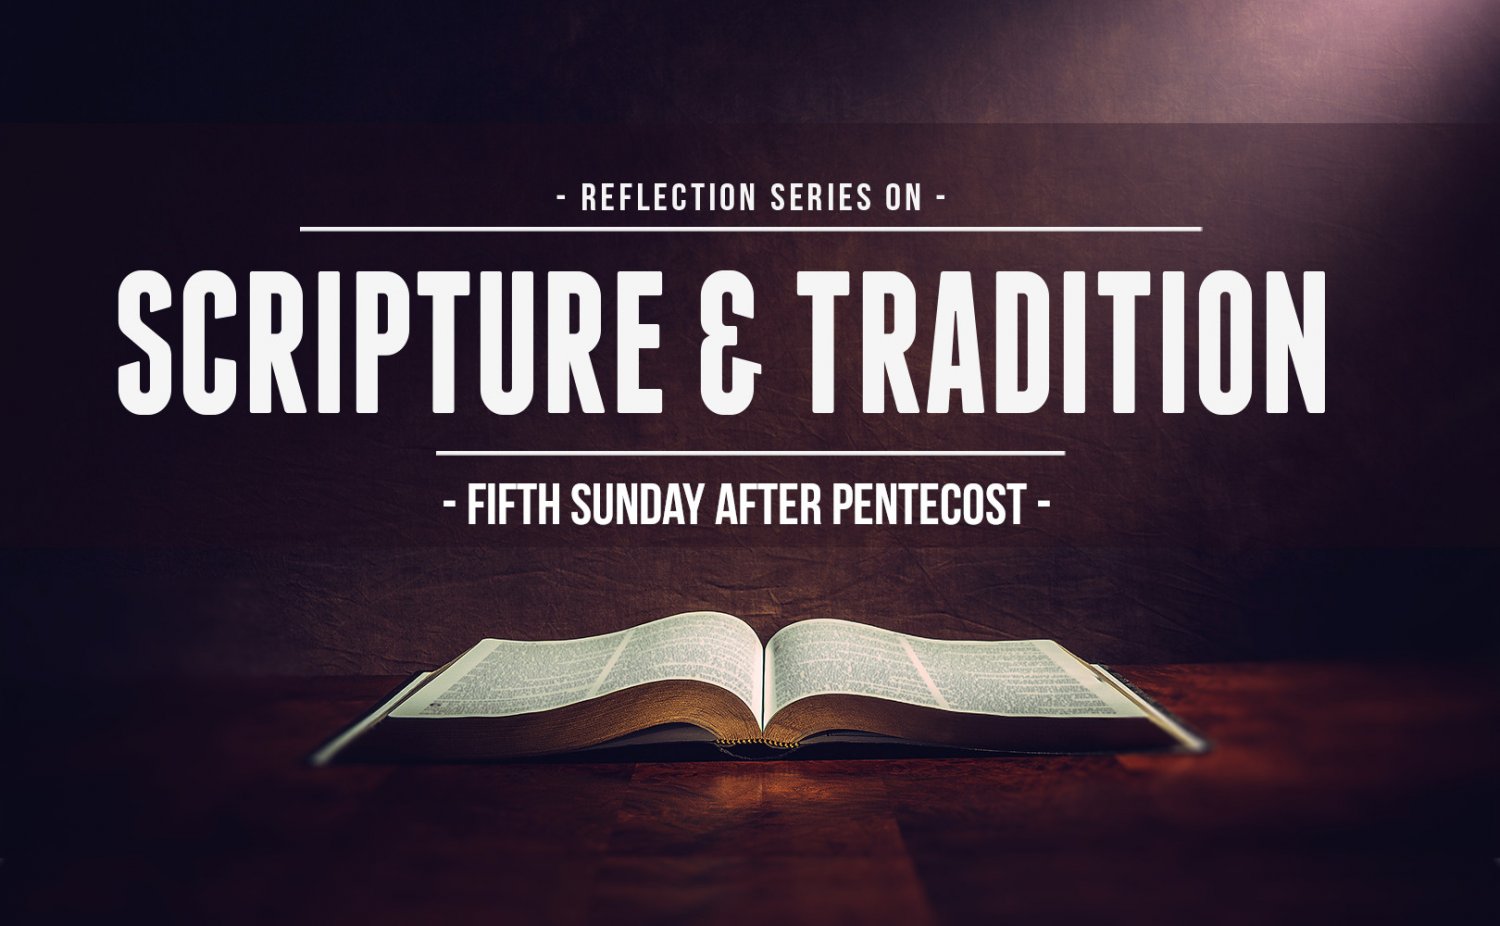 Fifth Sunday After Pentecost